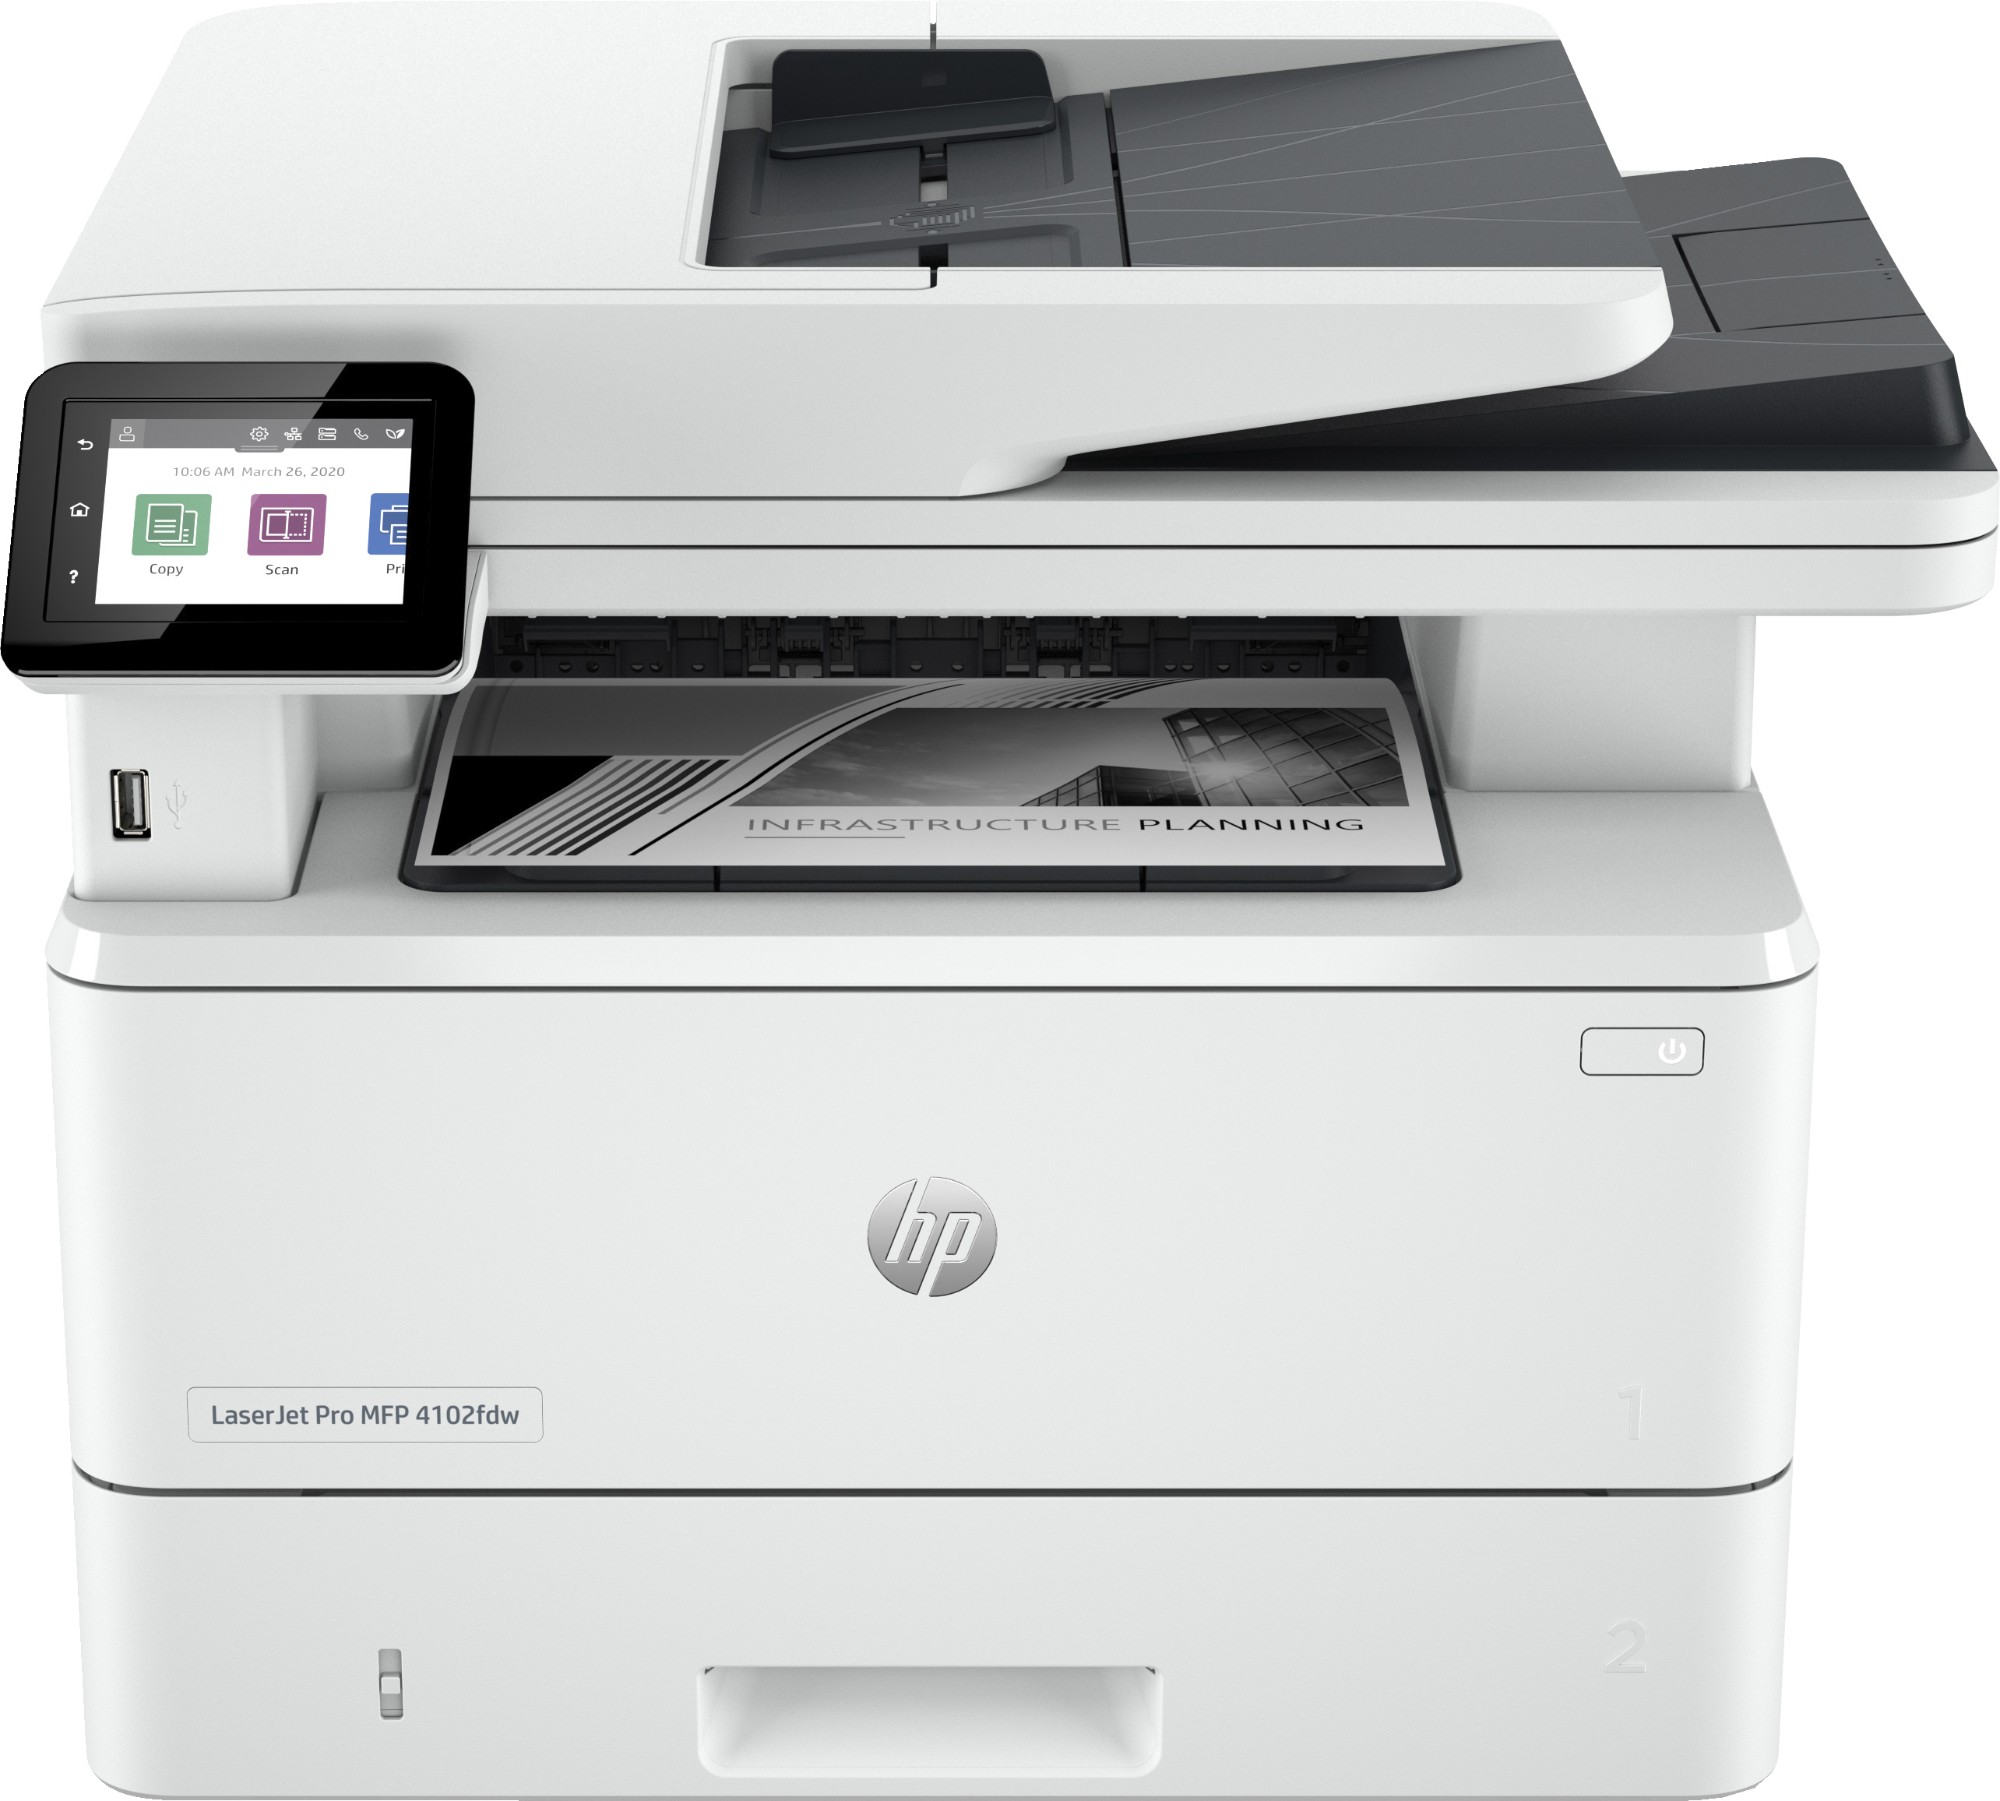 HP LaserJet Pro MFP 4102dw Printer, Black and white, Printer for  Small Official Ireland HP PC Printers Tablets Laptops Ink